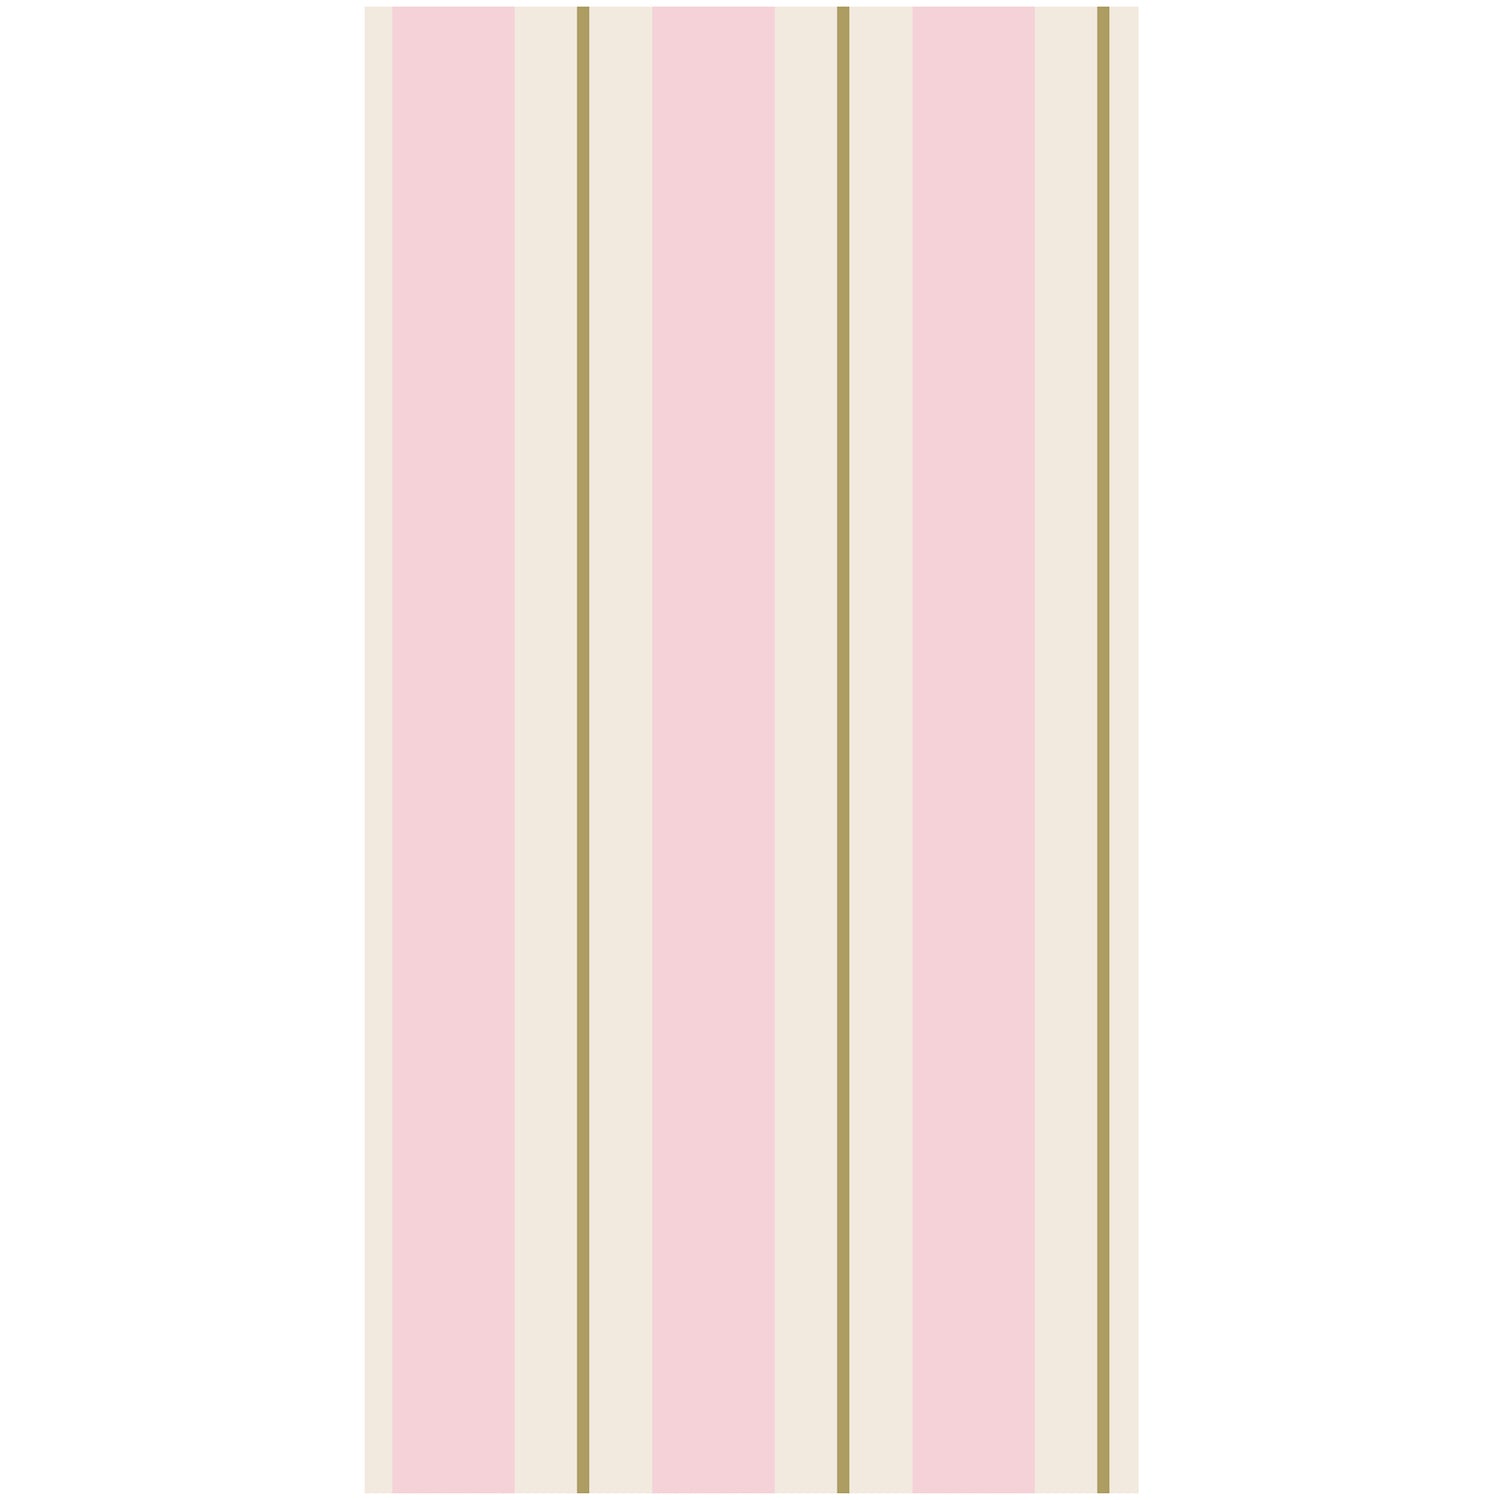 These Pink &amp; Gold Awning Stripe Napkins by Hester &amp; Cook feature a delightful combination of pink and gold stripes, perfect for setting an elegant party table.